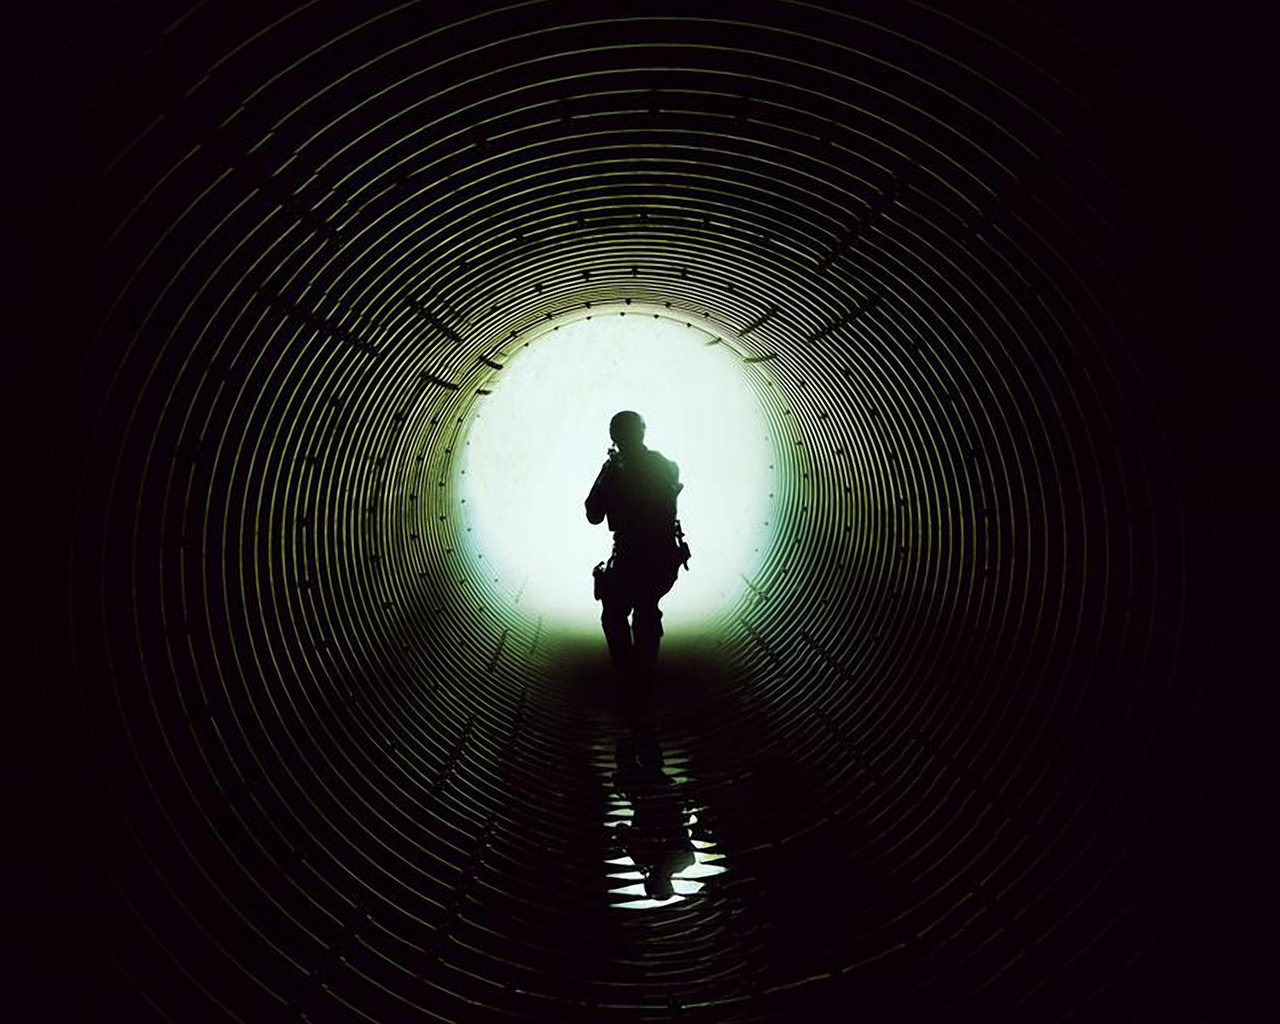 Sicario Sewer Tunnel for 1280 x 1024 resolution